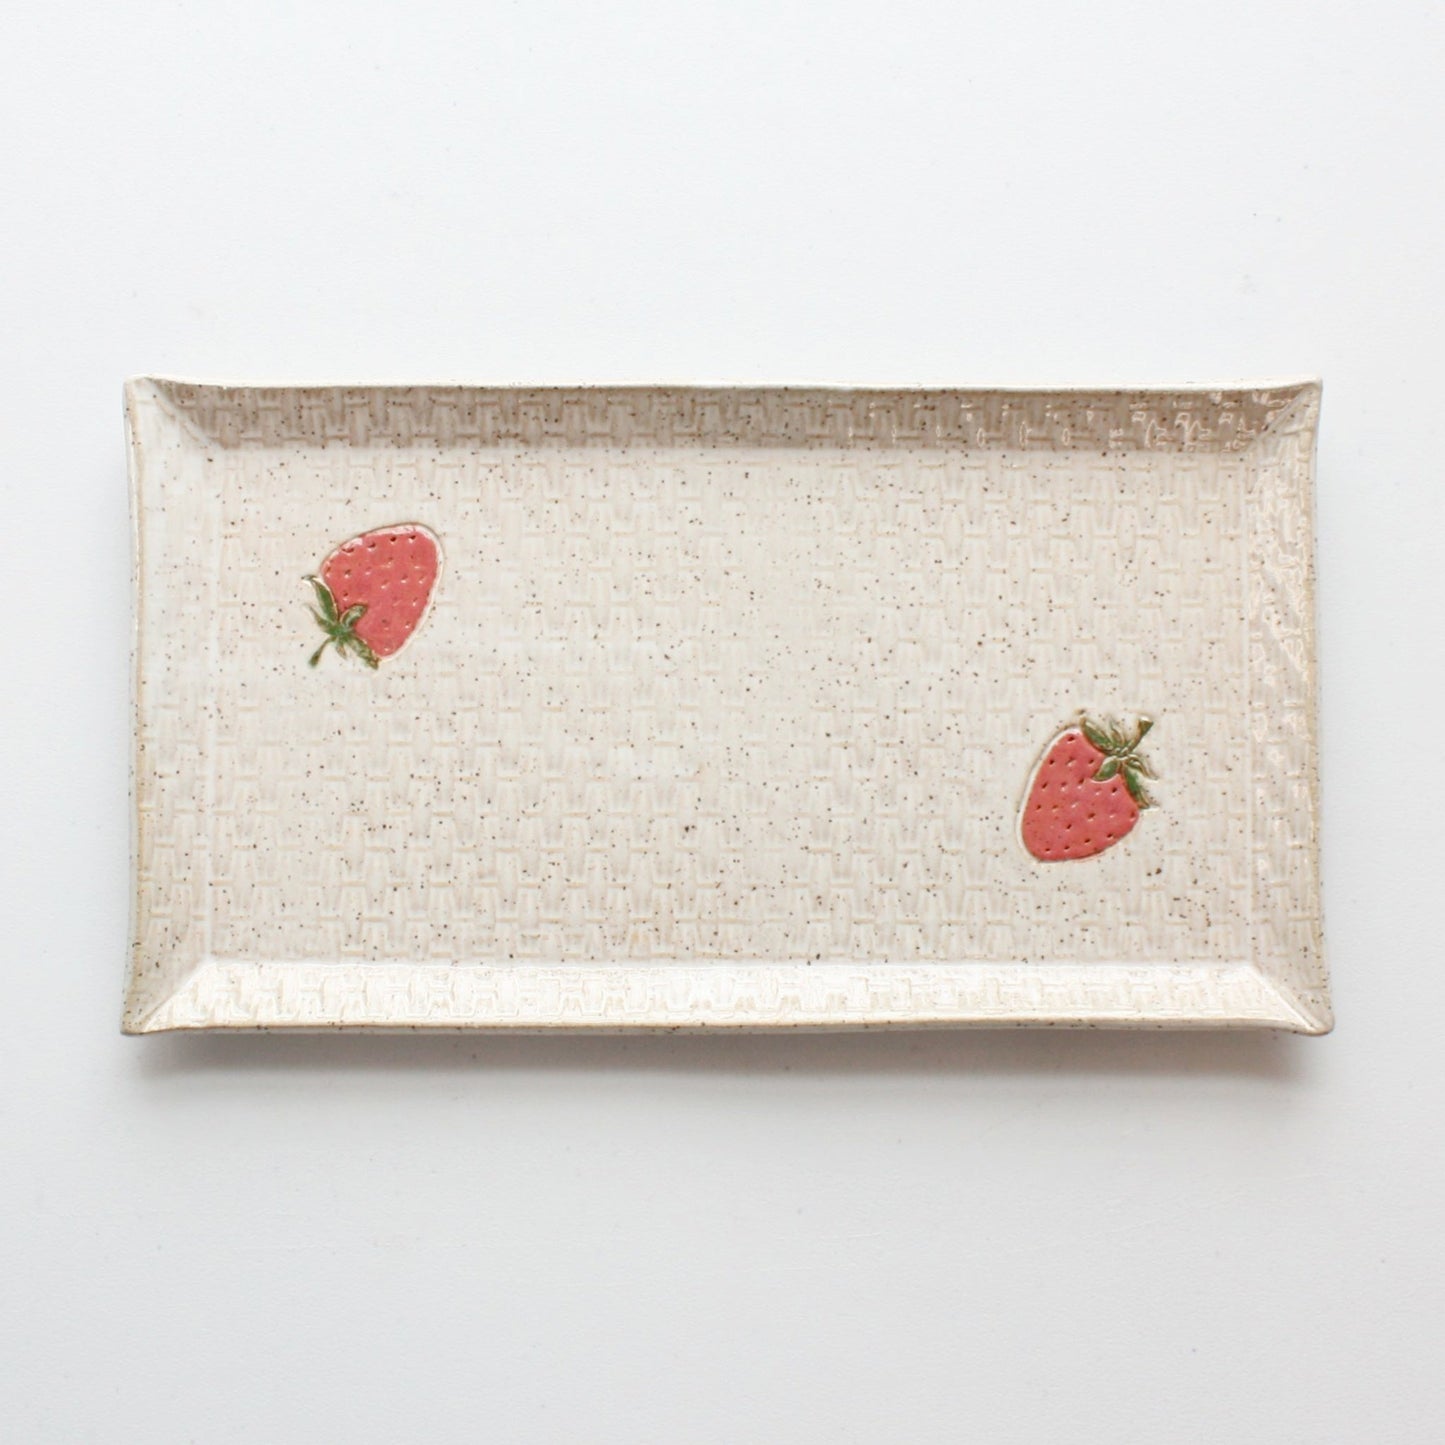 Strawberry Ceramic Platter - Made in the USA